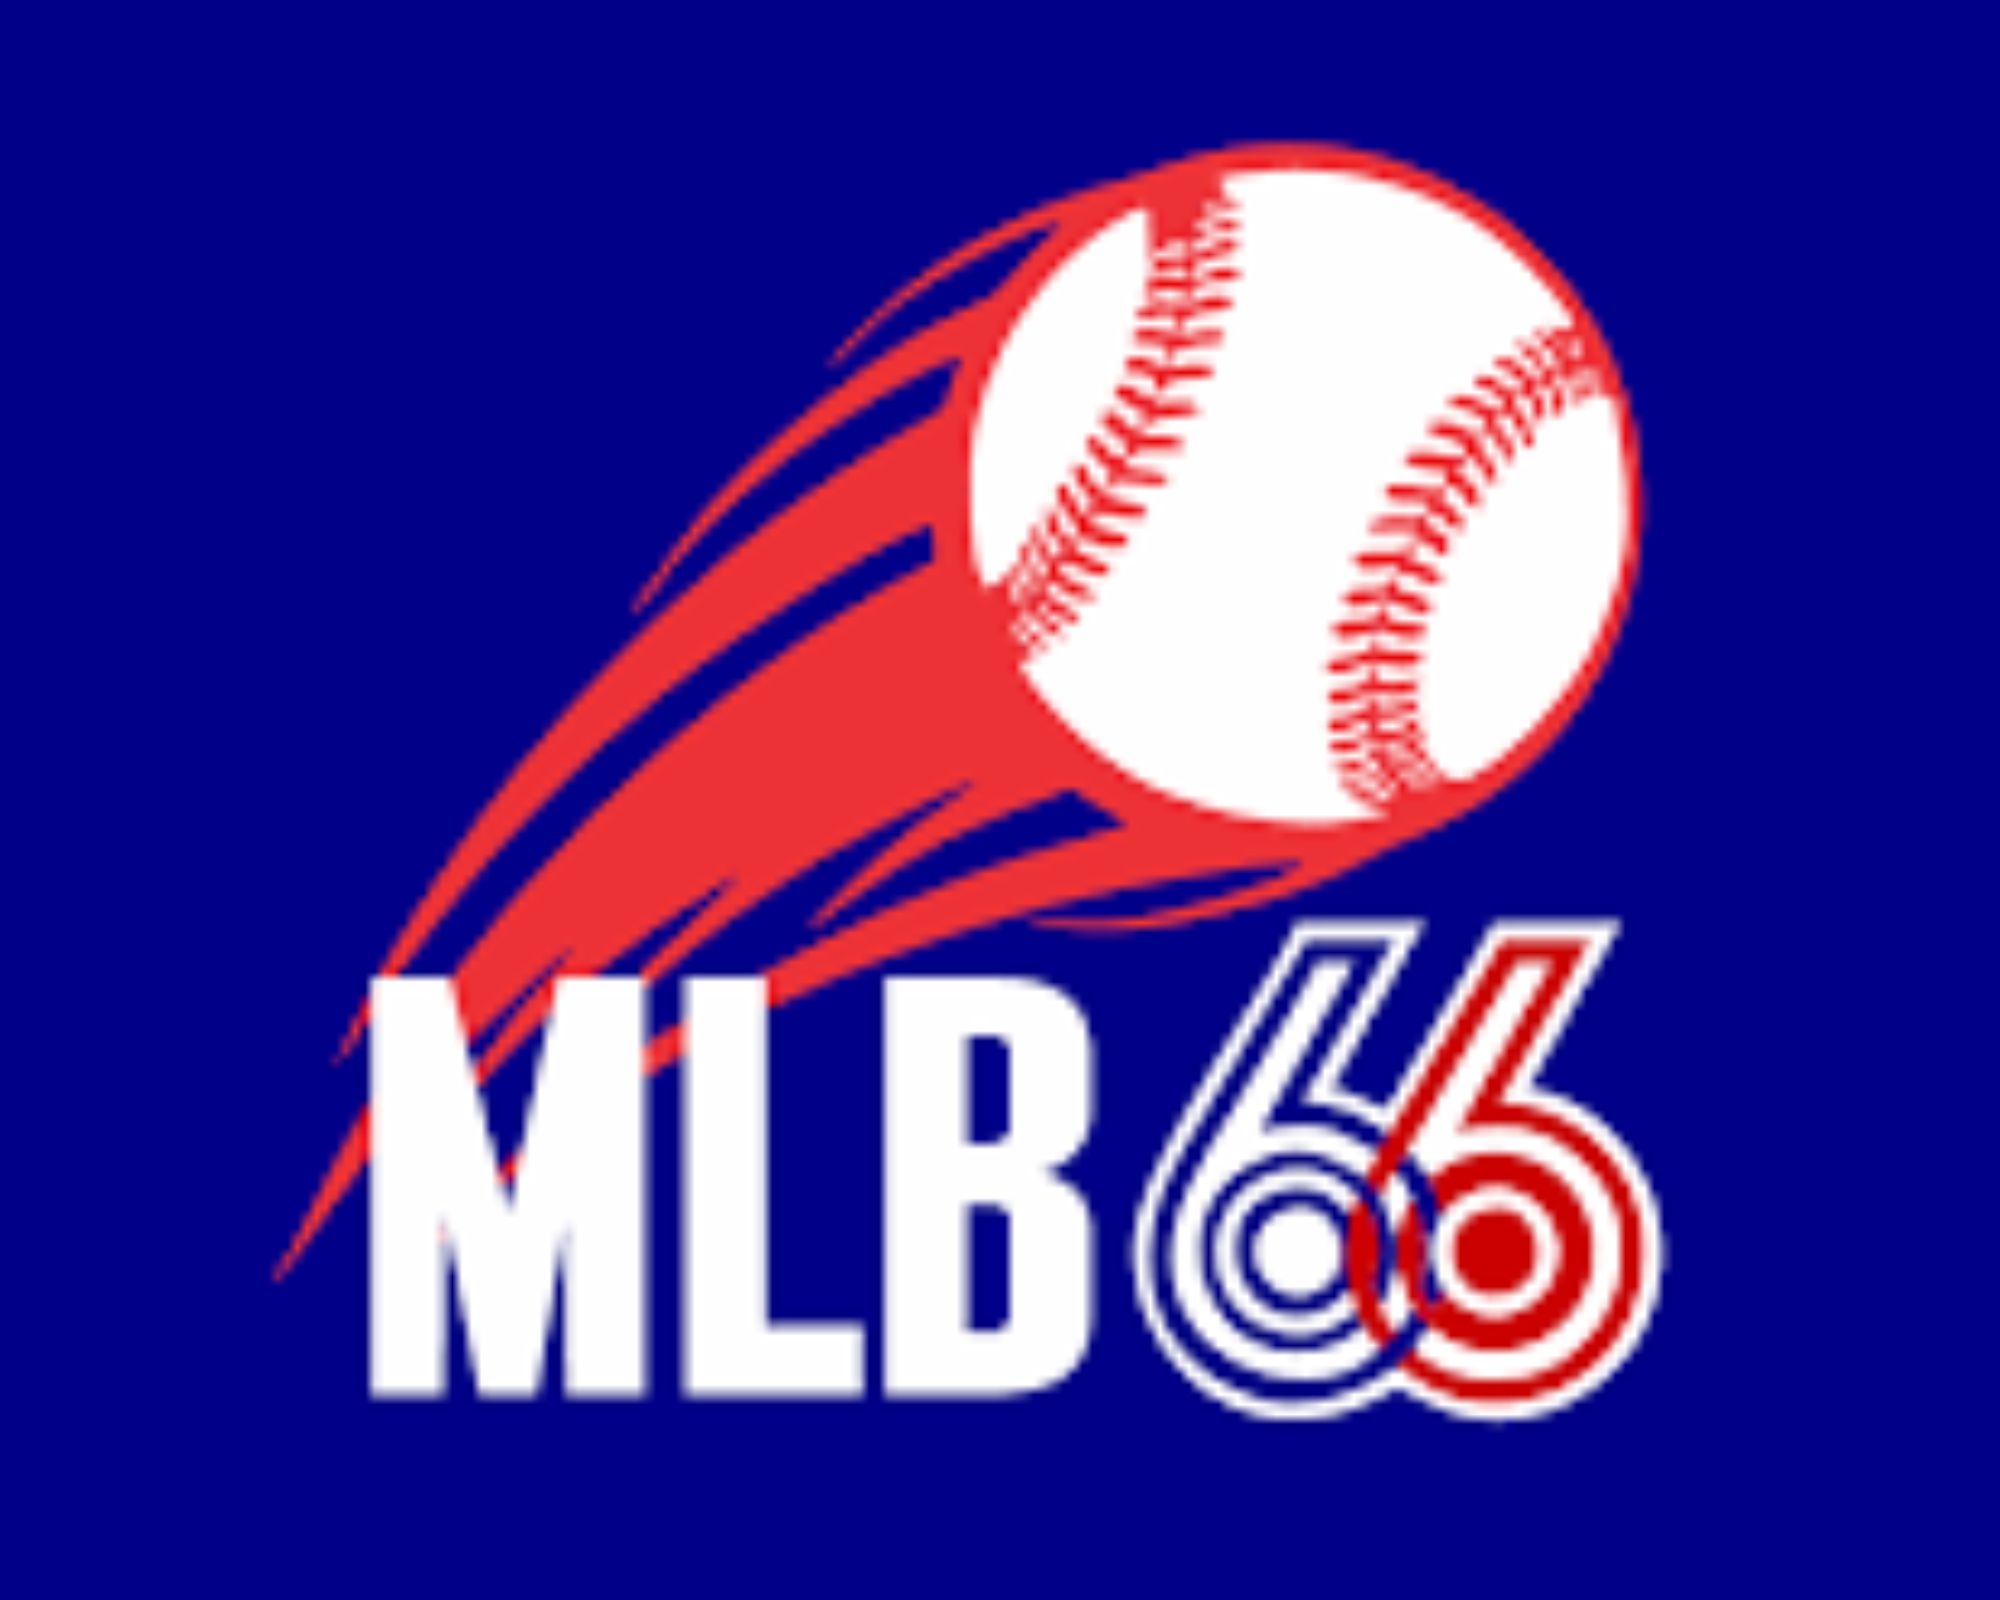 "MLB66 Streaming: Your Ultimate Guide to Enjoying Baseball Action Online"